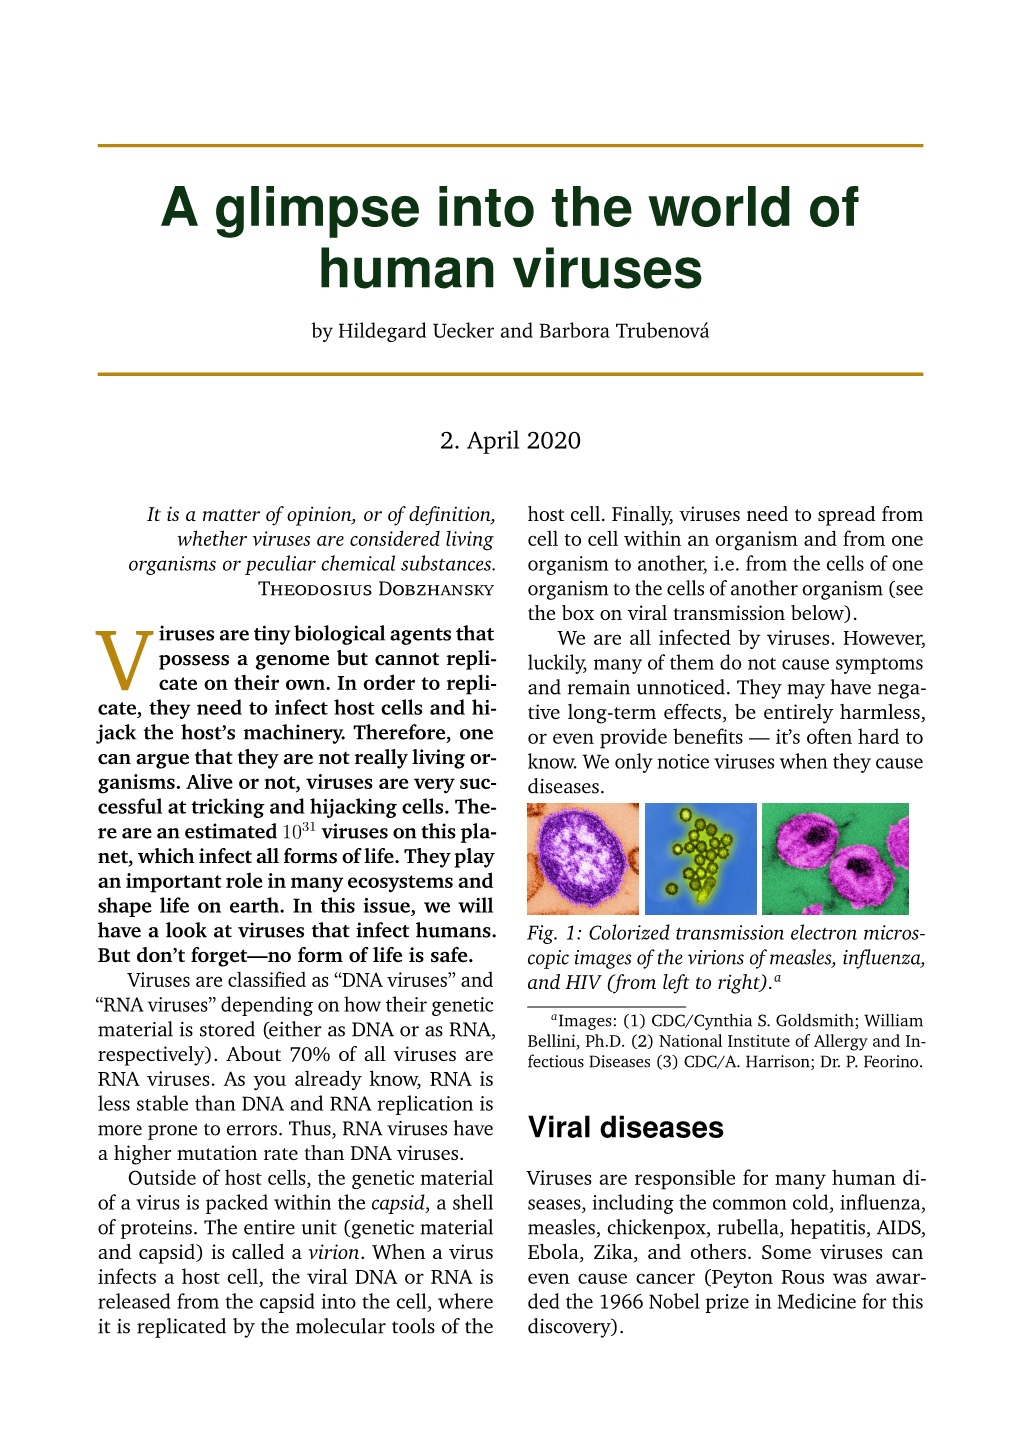 A Glimpse Into the World of Human Viruses